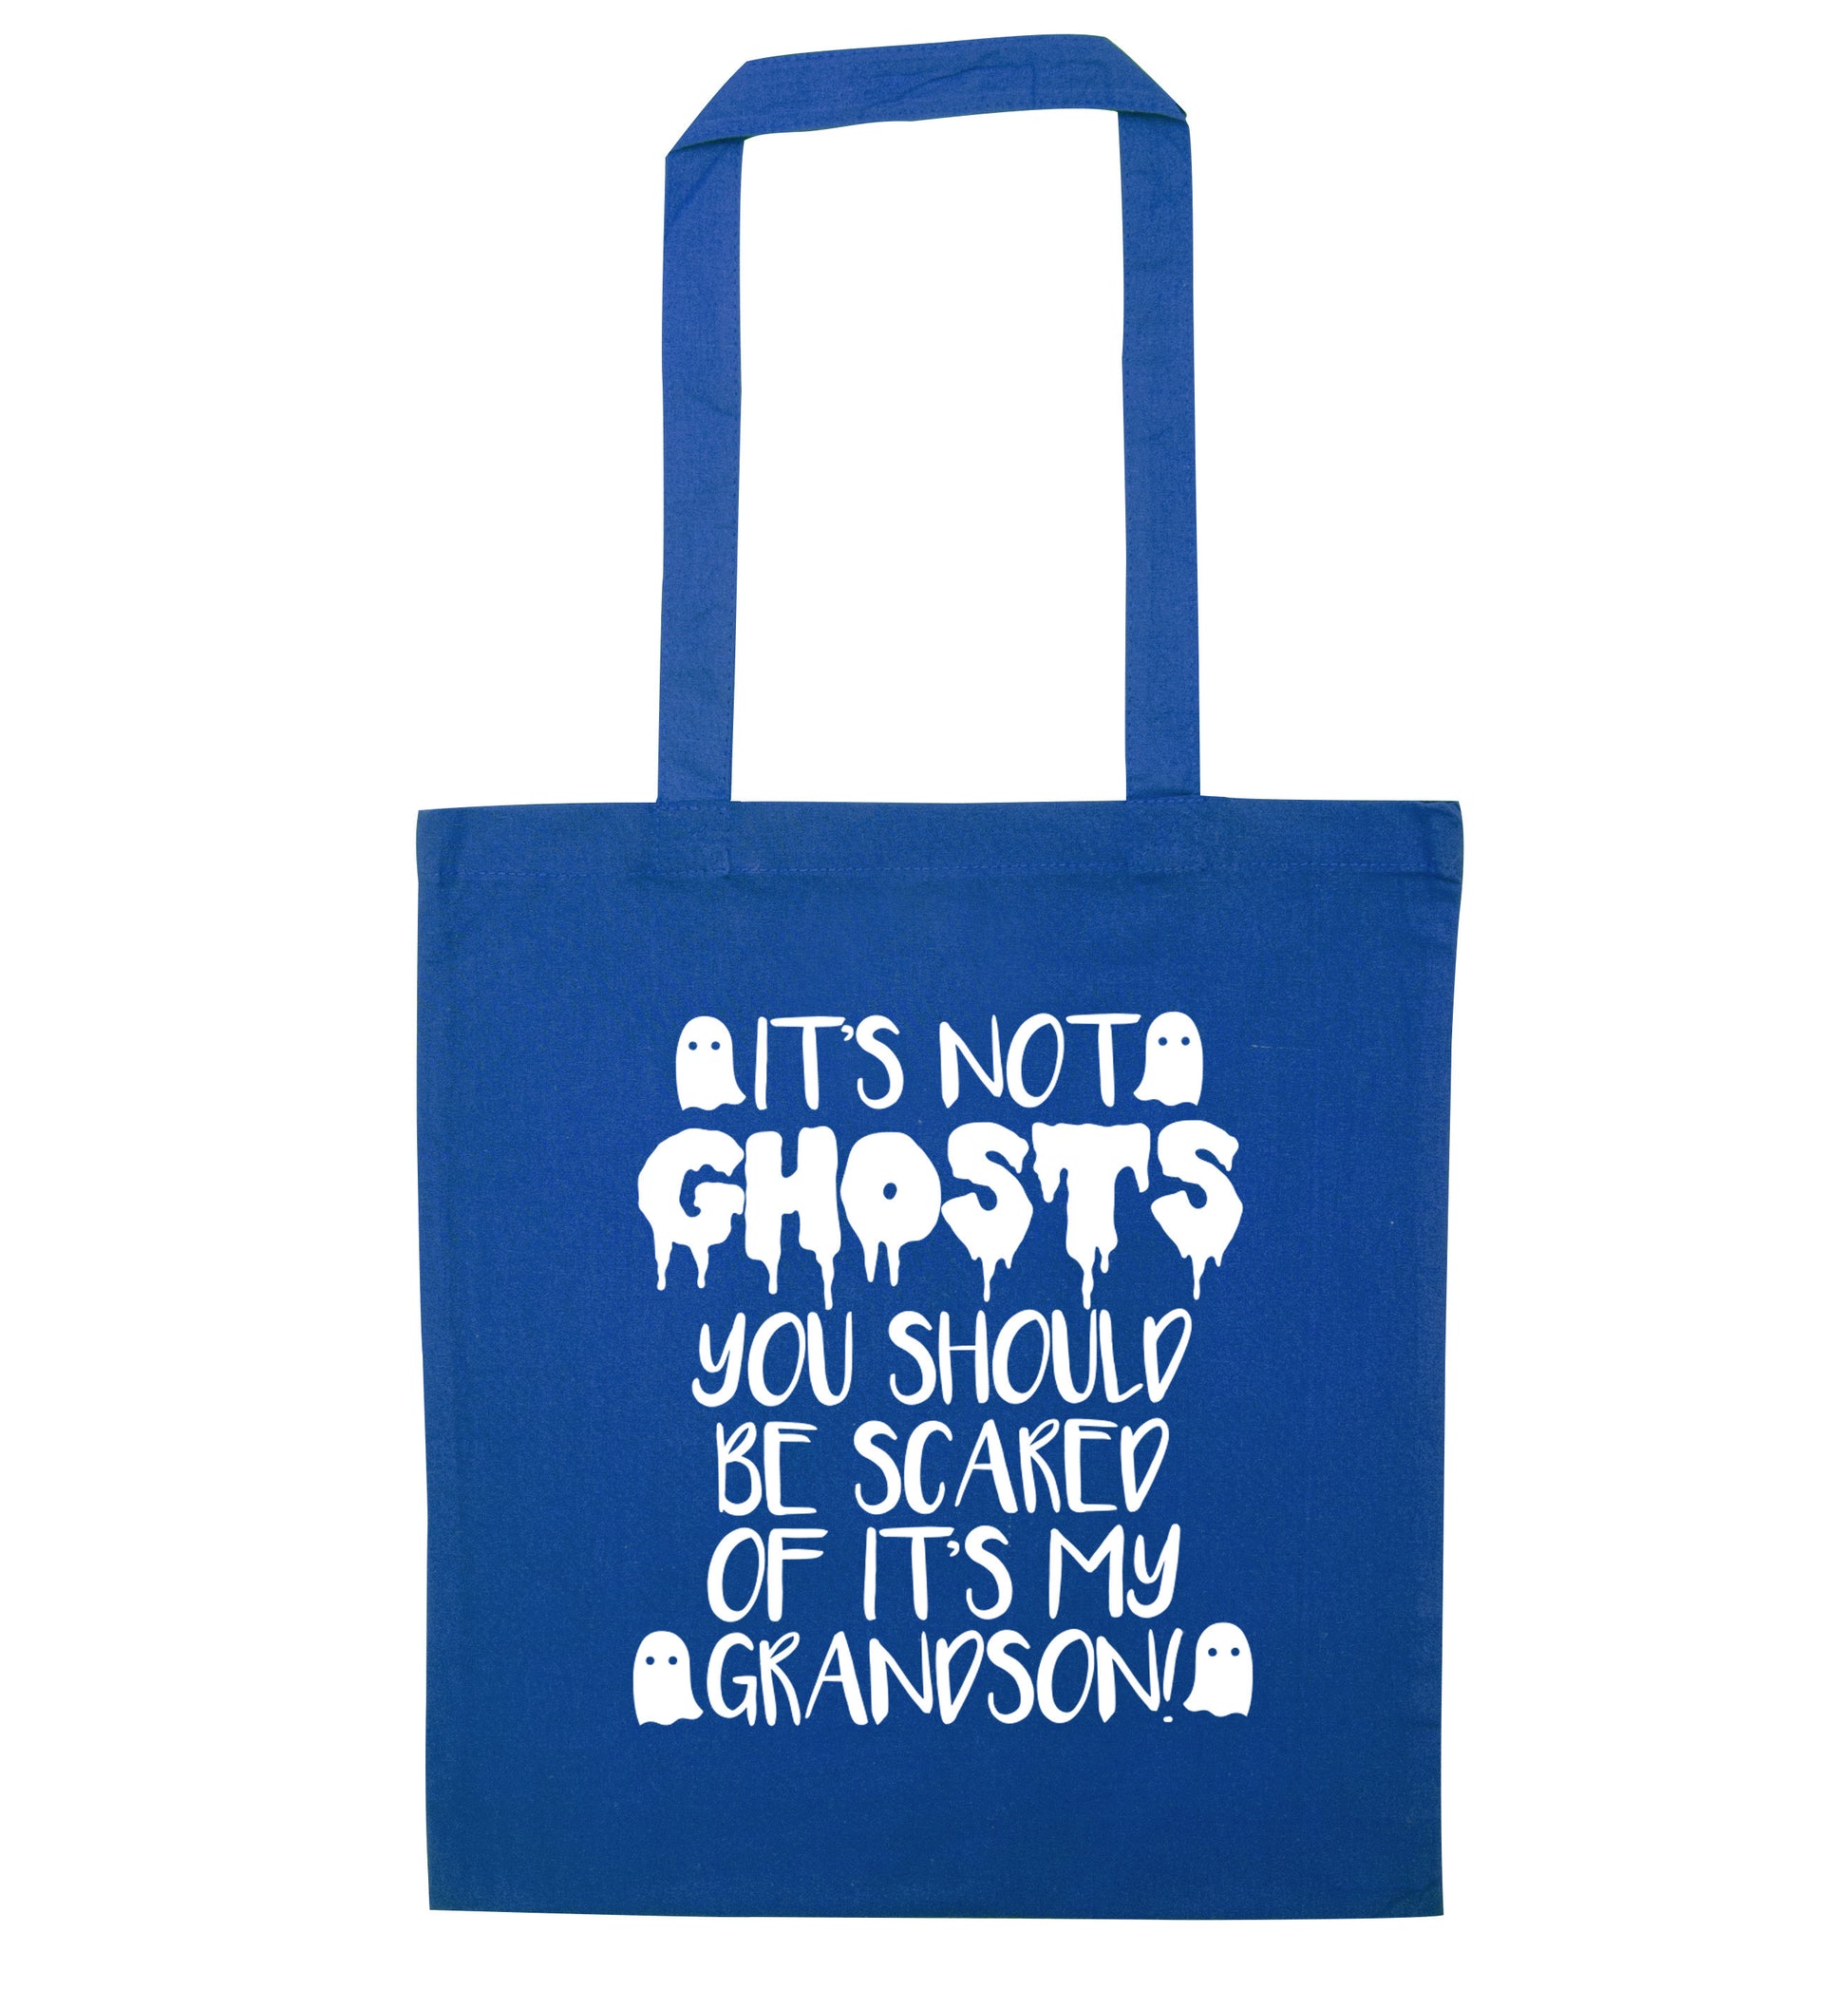 It's not ghosts you should be scared of it's my grandson! blue tote bag